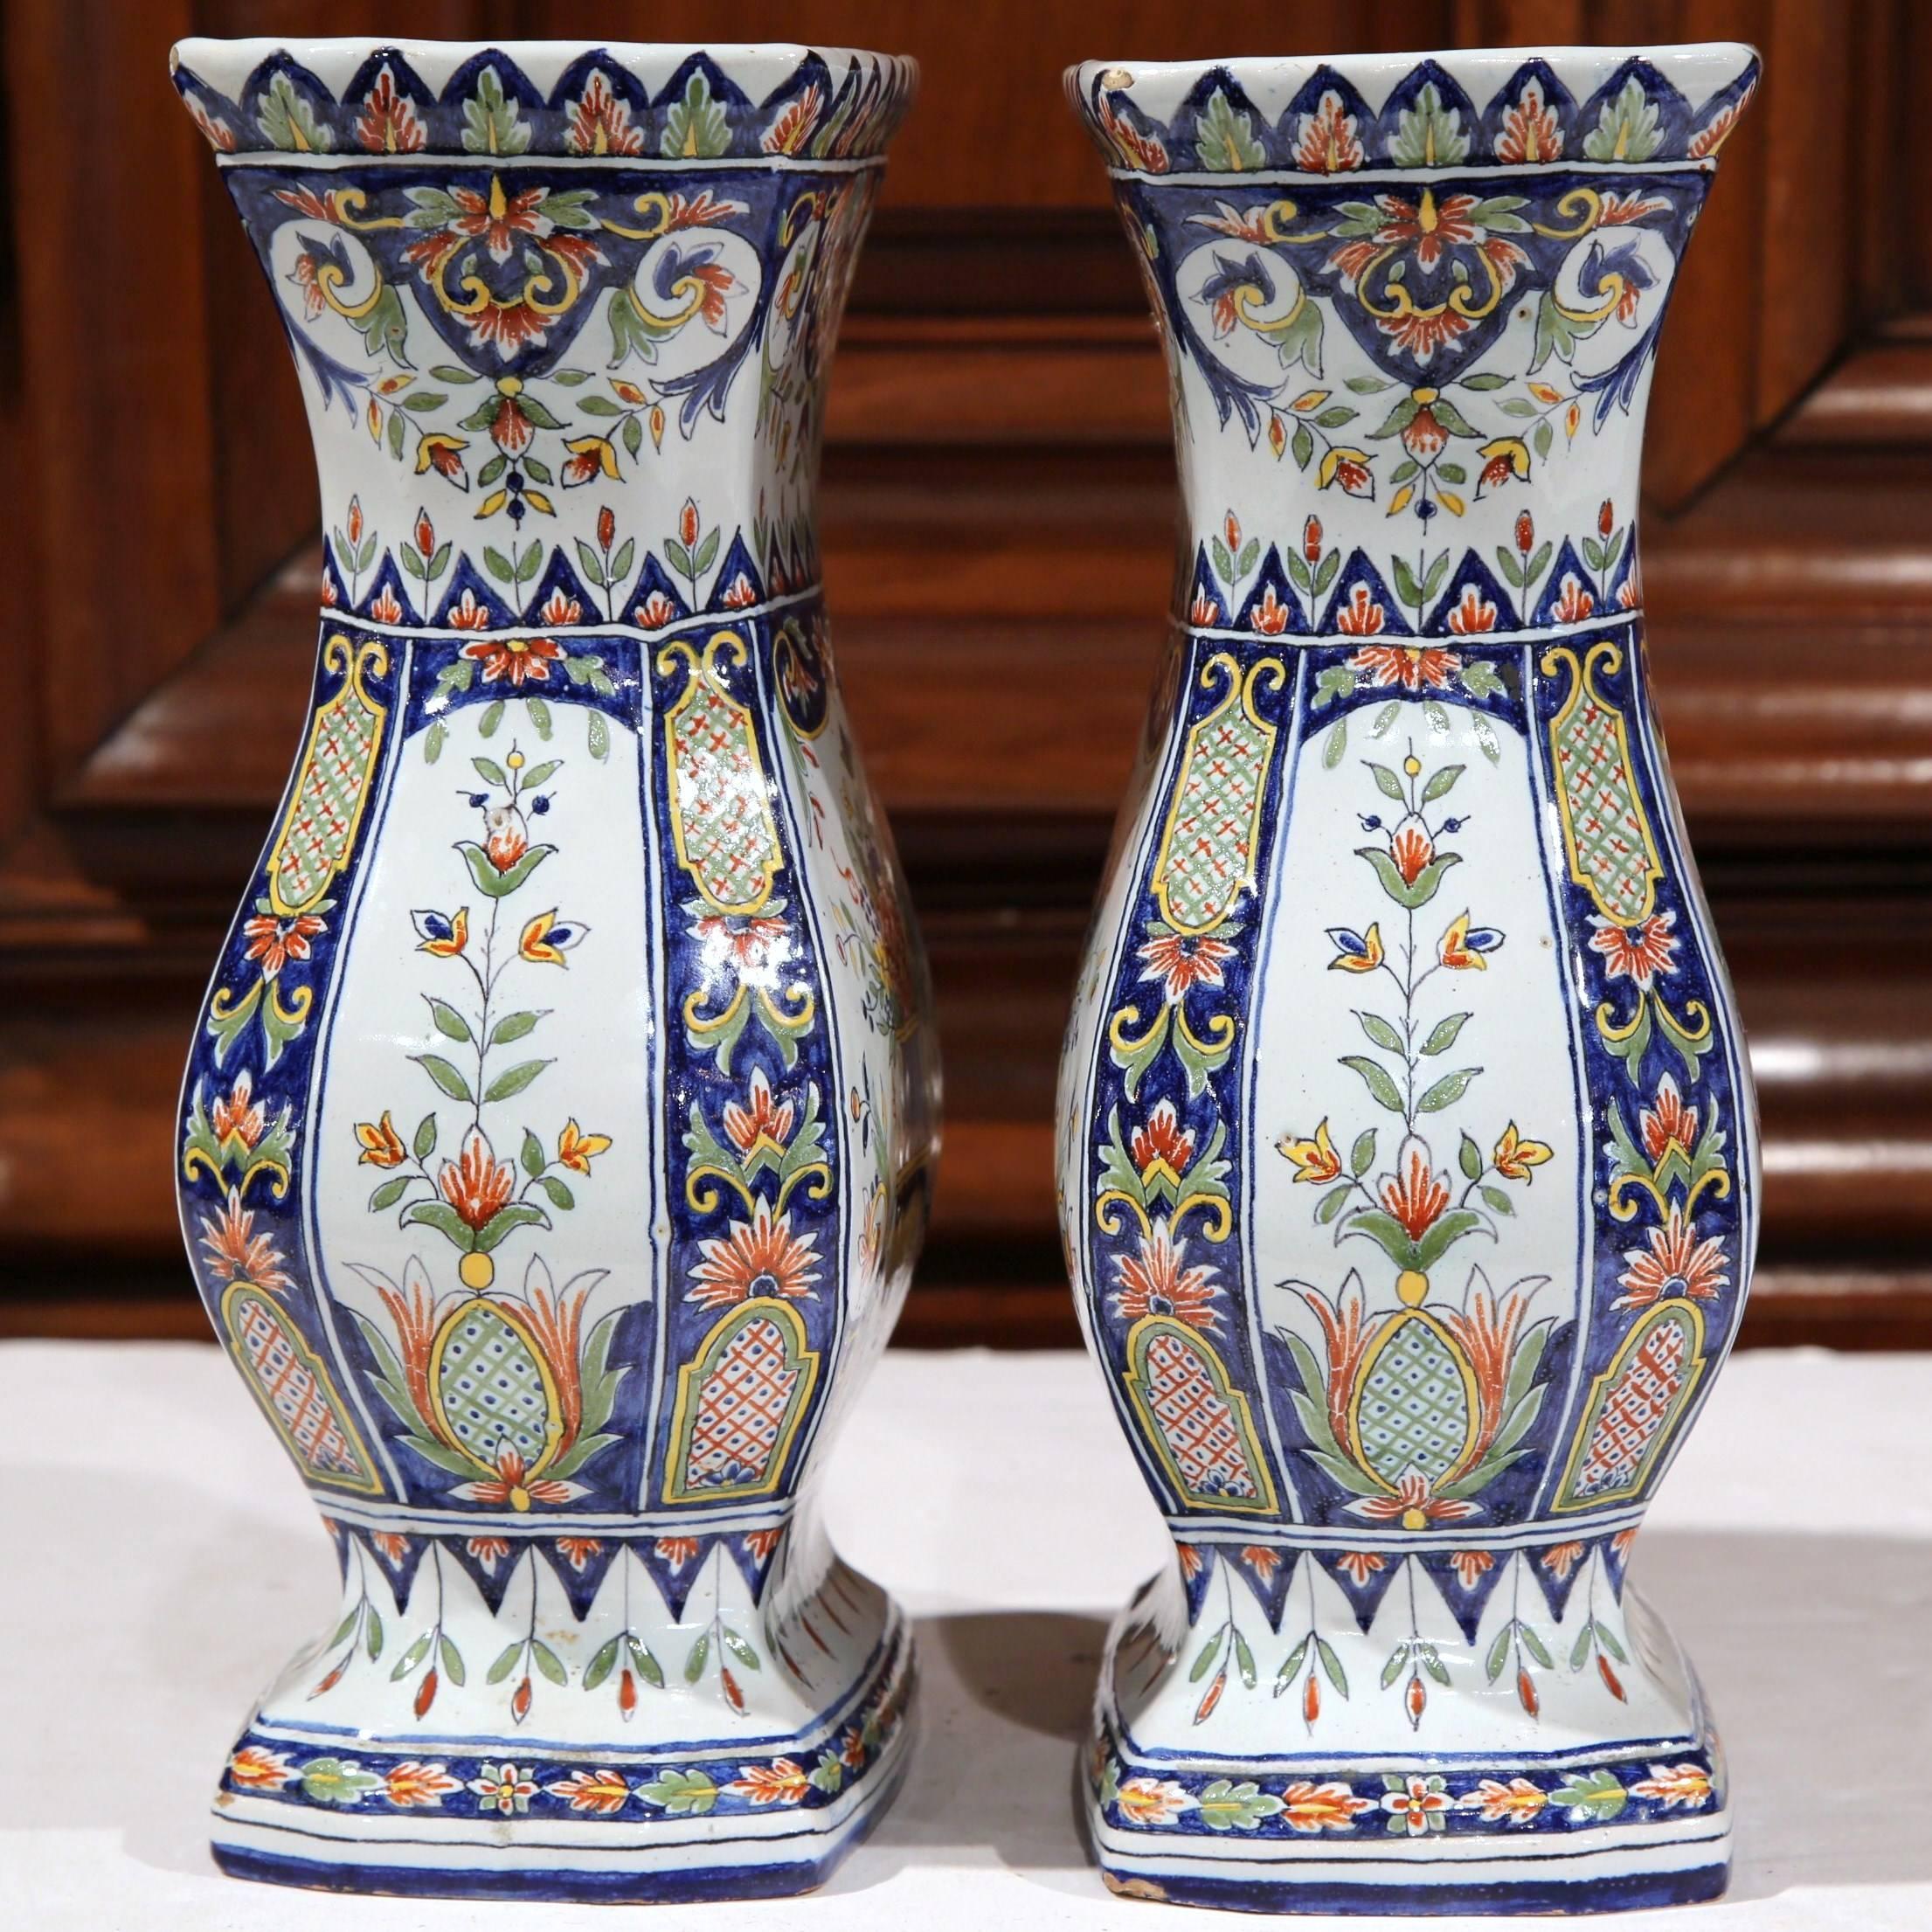 Add color to a living room or dining room with this fine pair of antique vases from Rouen (Normandy), France; crafted circa 1870, both vases are intricately hand-painted with beautiful floral motifs. The colorful vases have a wide mouth and would